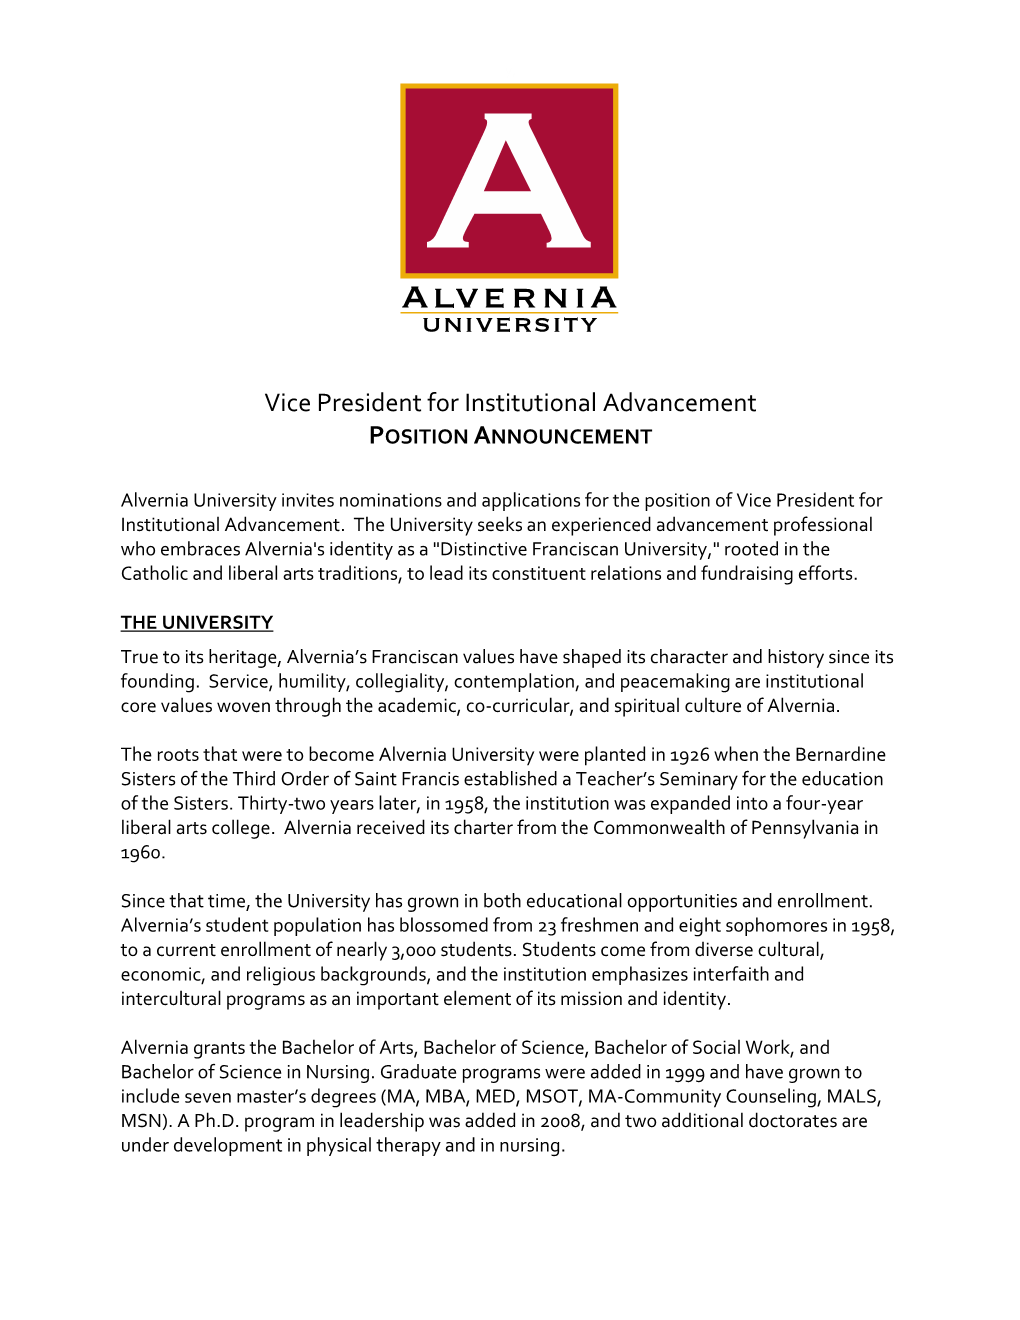 Vice President for Institutional Advancement POSITION ANNOUNCEMENT